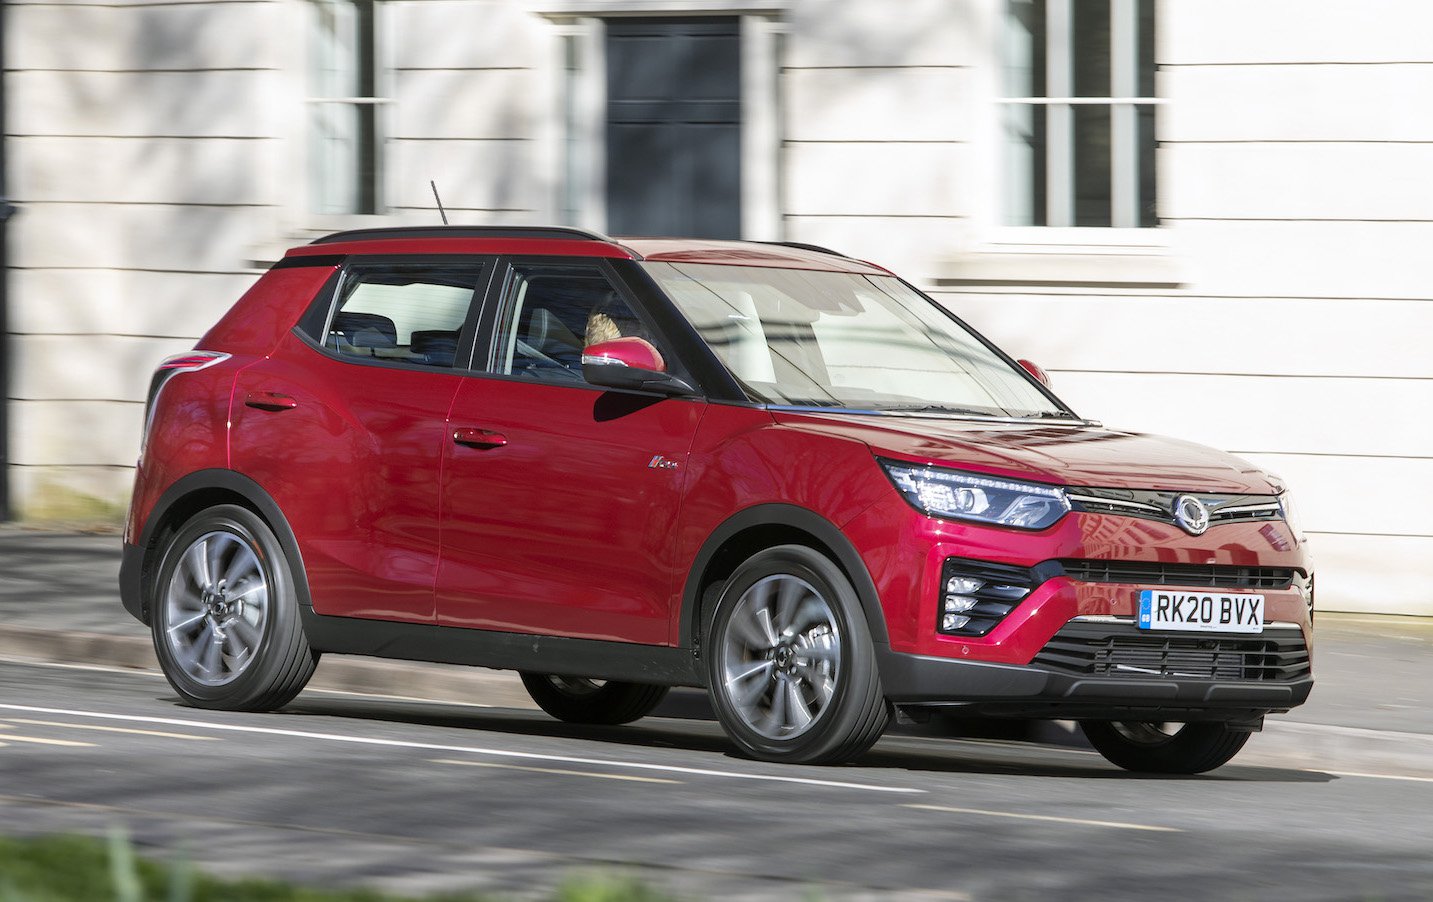 <p><strong>Model</strong> Tivoli | <strong>Version</strong> 1.6D Ultimate | <strong>Fuel economy</strong> 50.4mpg | <strong>List Price</strong> £21,860 | <strong>Target Price</strong> £21,860 | <strong>What Car? rating</strong> 2/5</p>  <p>The Tivoli is decent for the money, but massively outclassed in terms of space, efficiency and comfort by pricier small SUVs, including the Ford Puma, Skoda Kamiq and Volkswagen T-Roc. </p>